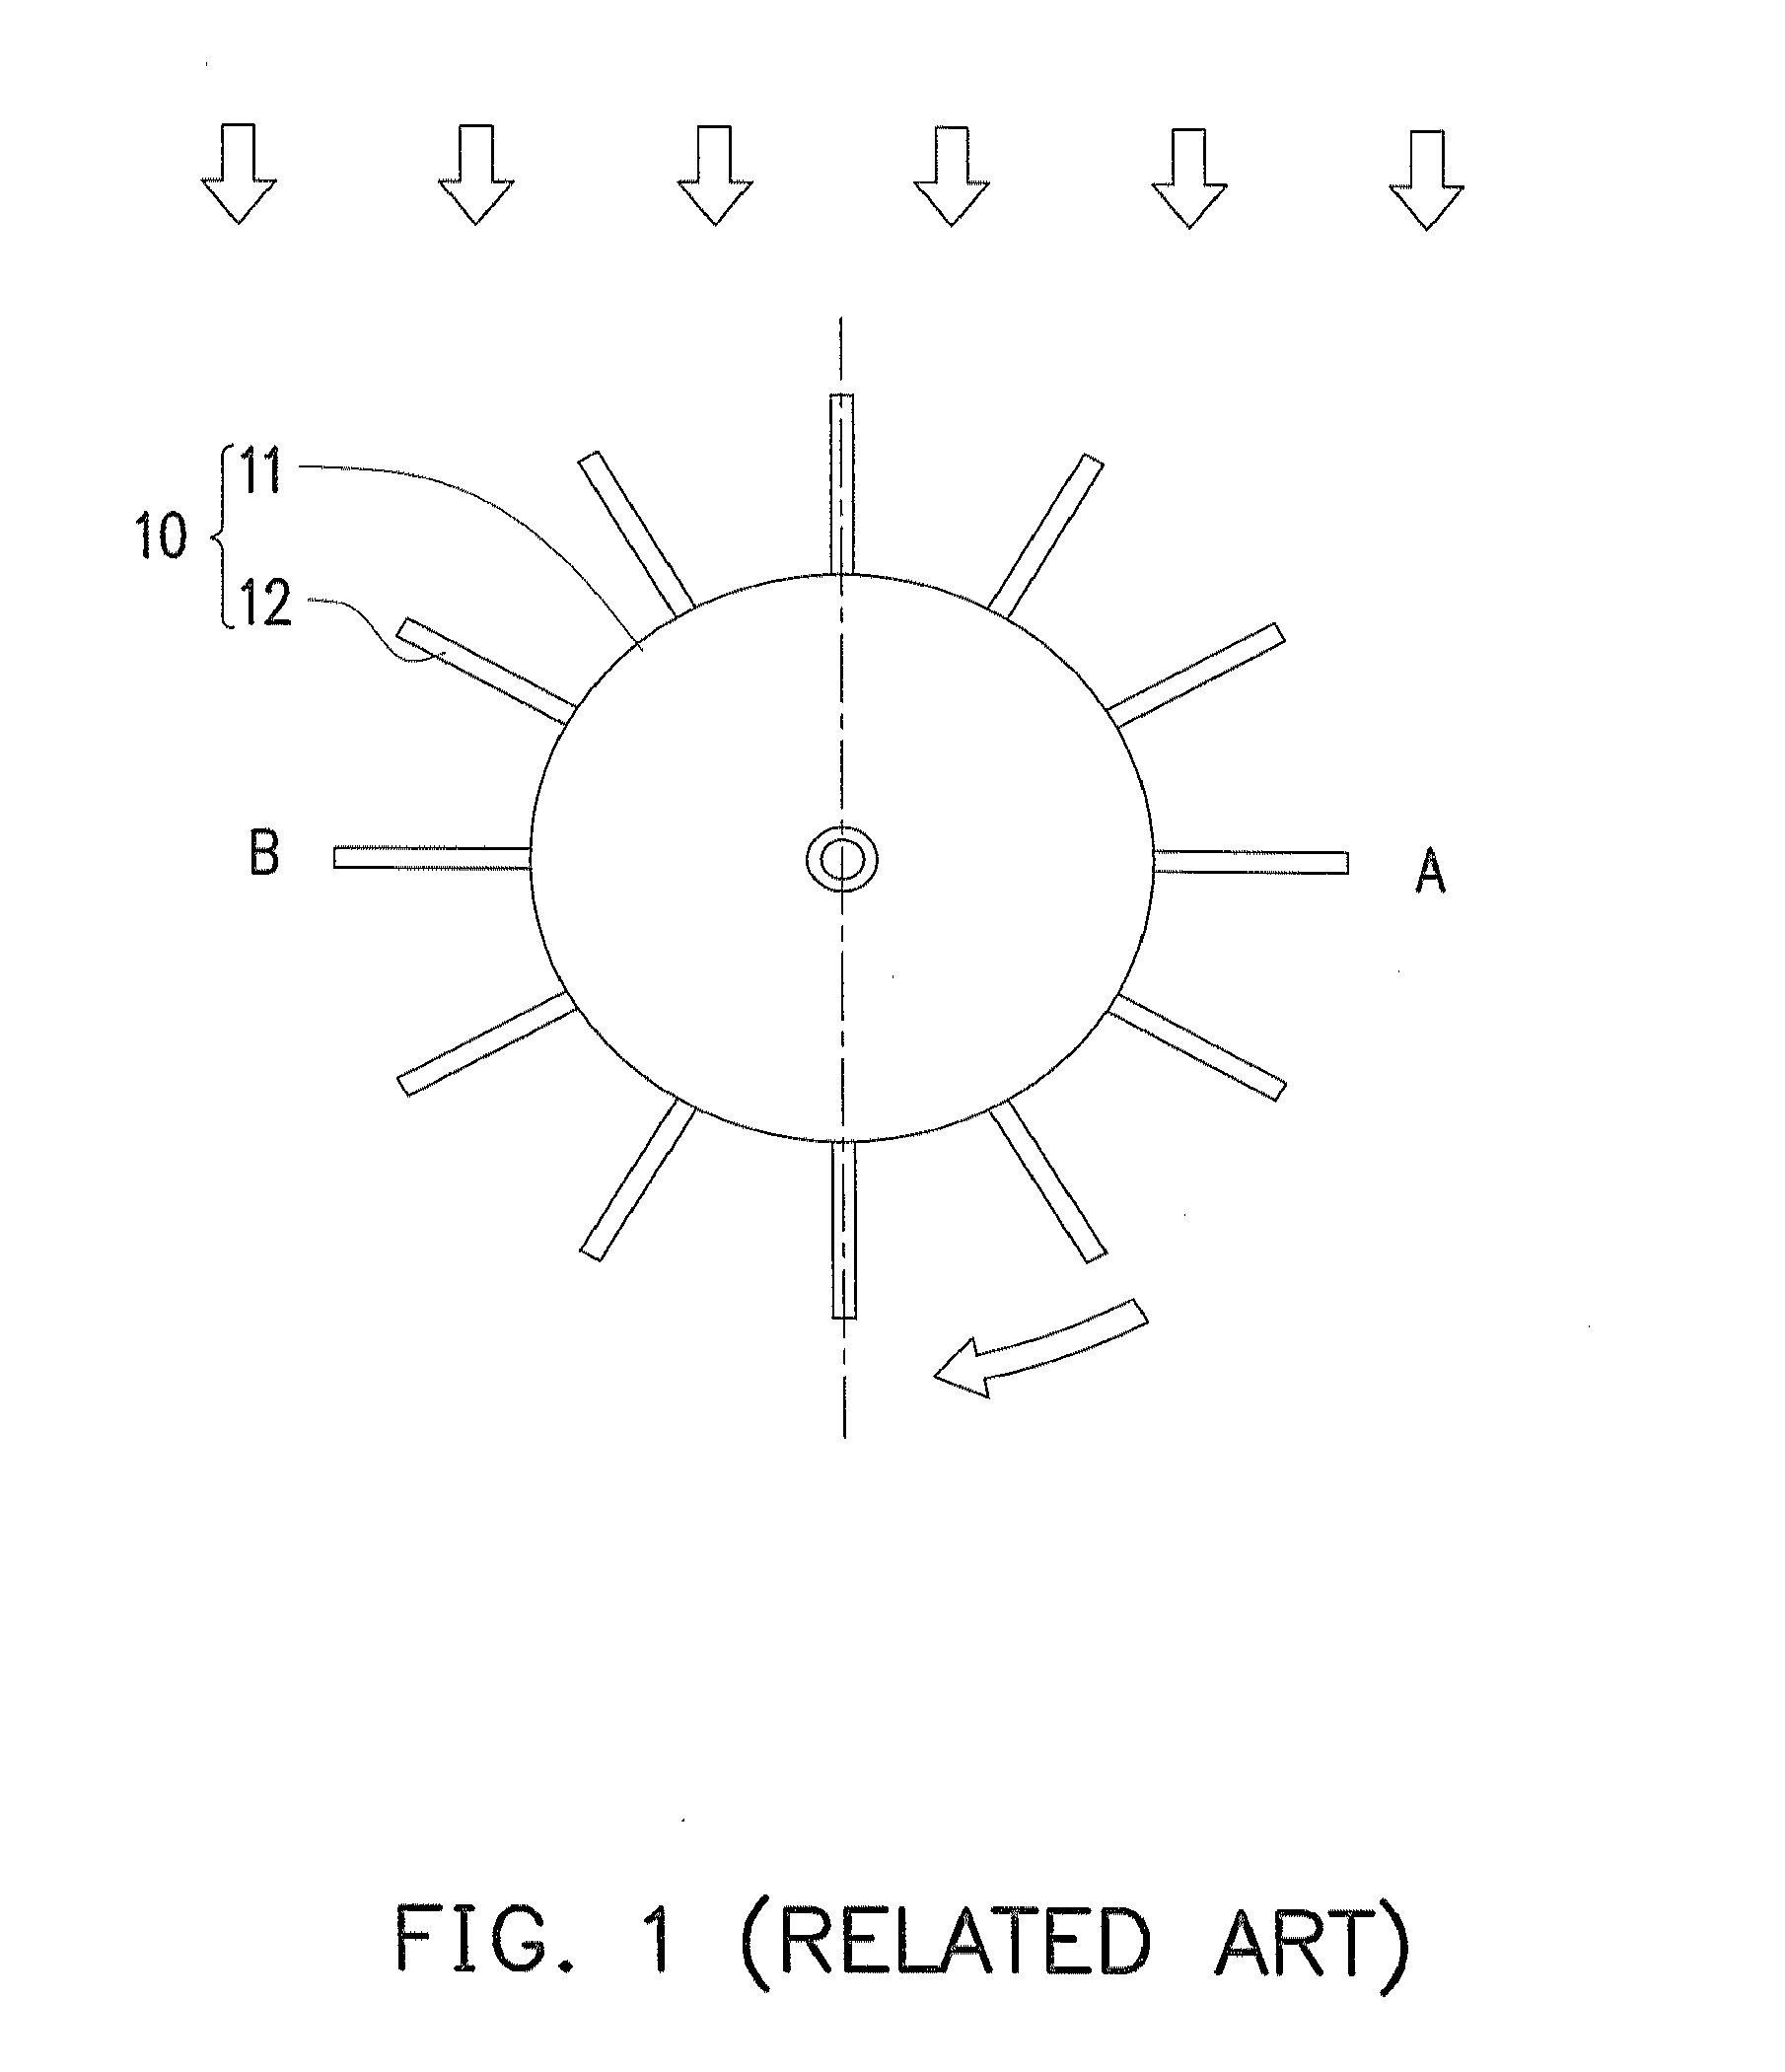 Eccentric dual rotor assembly for wind power generation